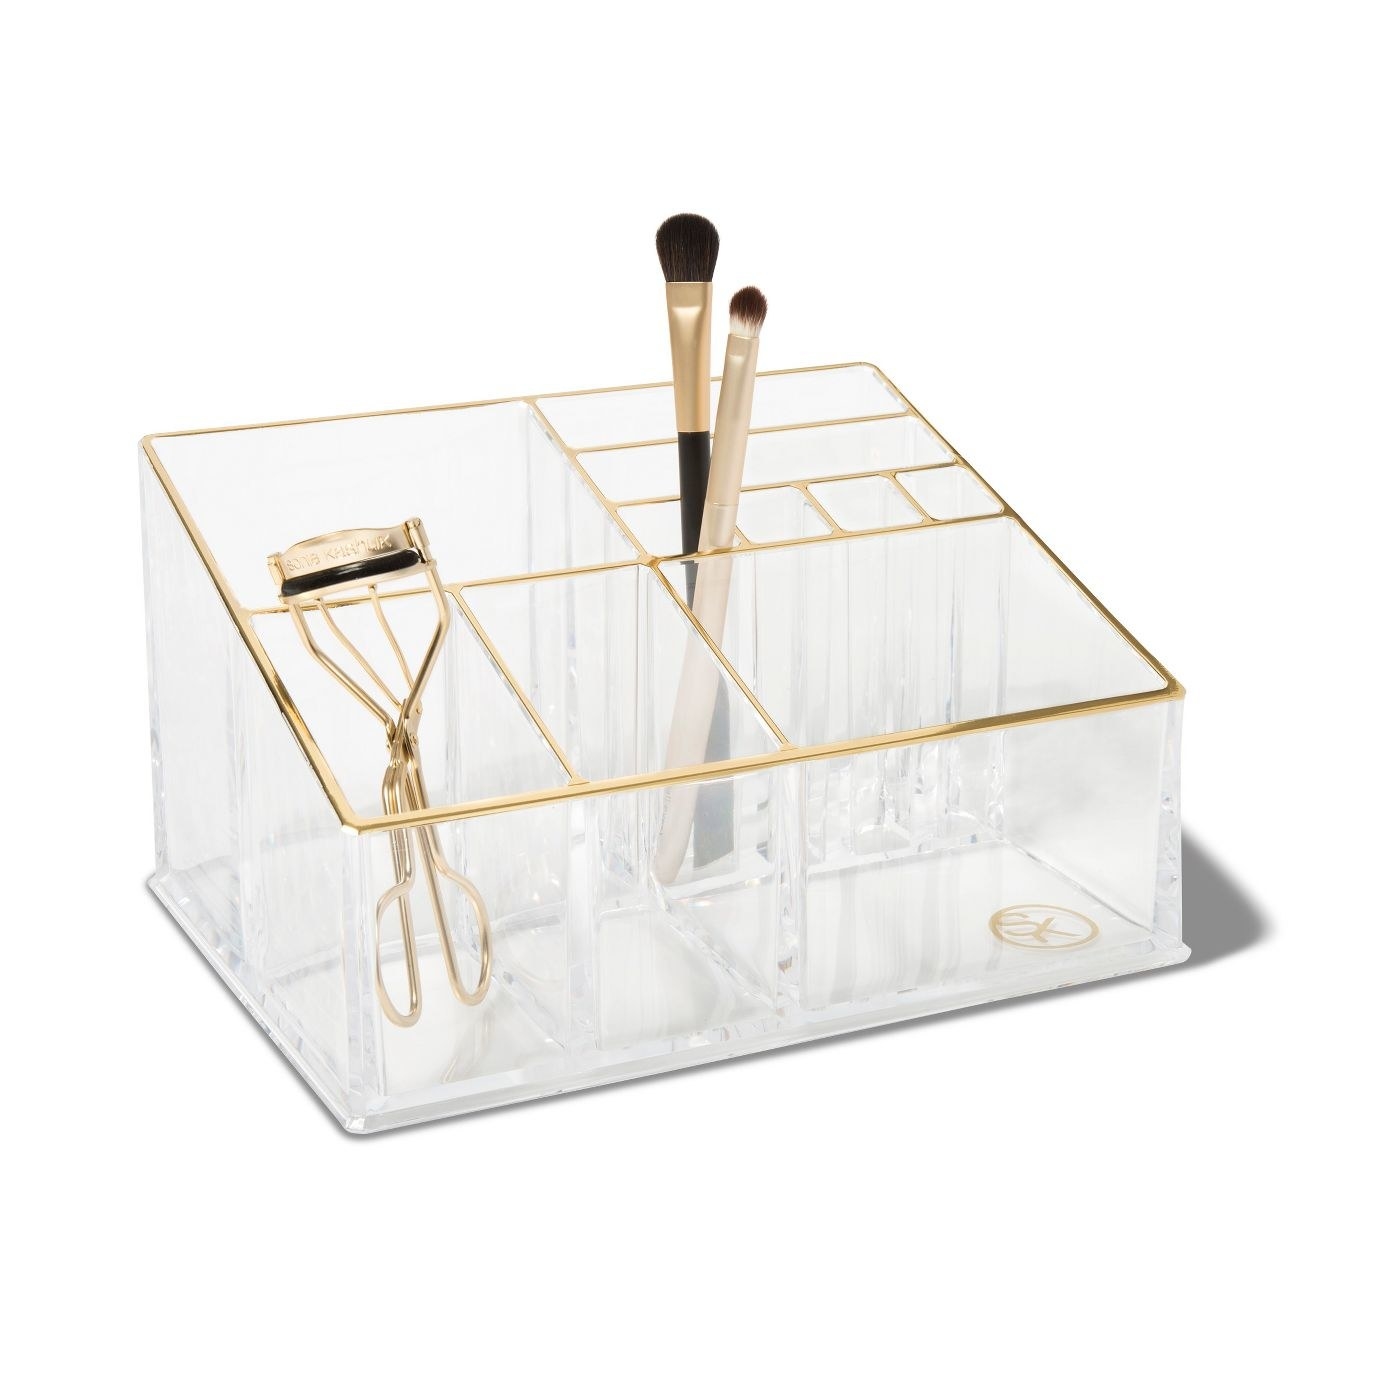 The makeup organizer holding brushes and a mascara curler to show the size of its compartments